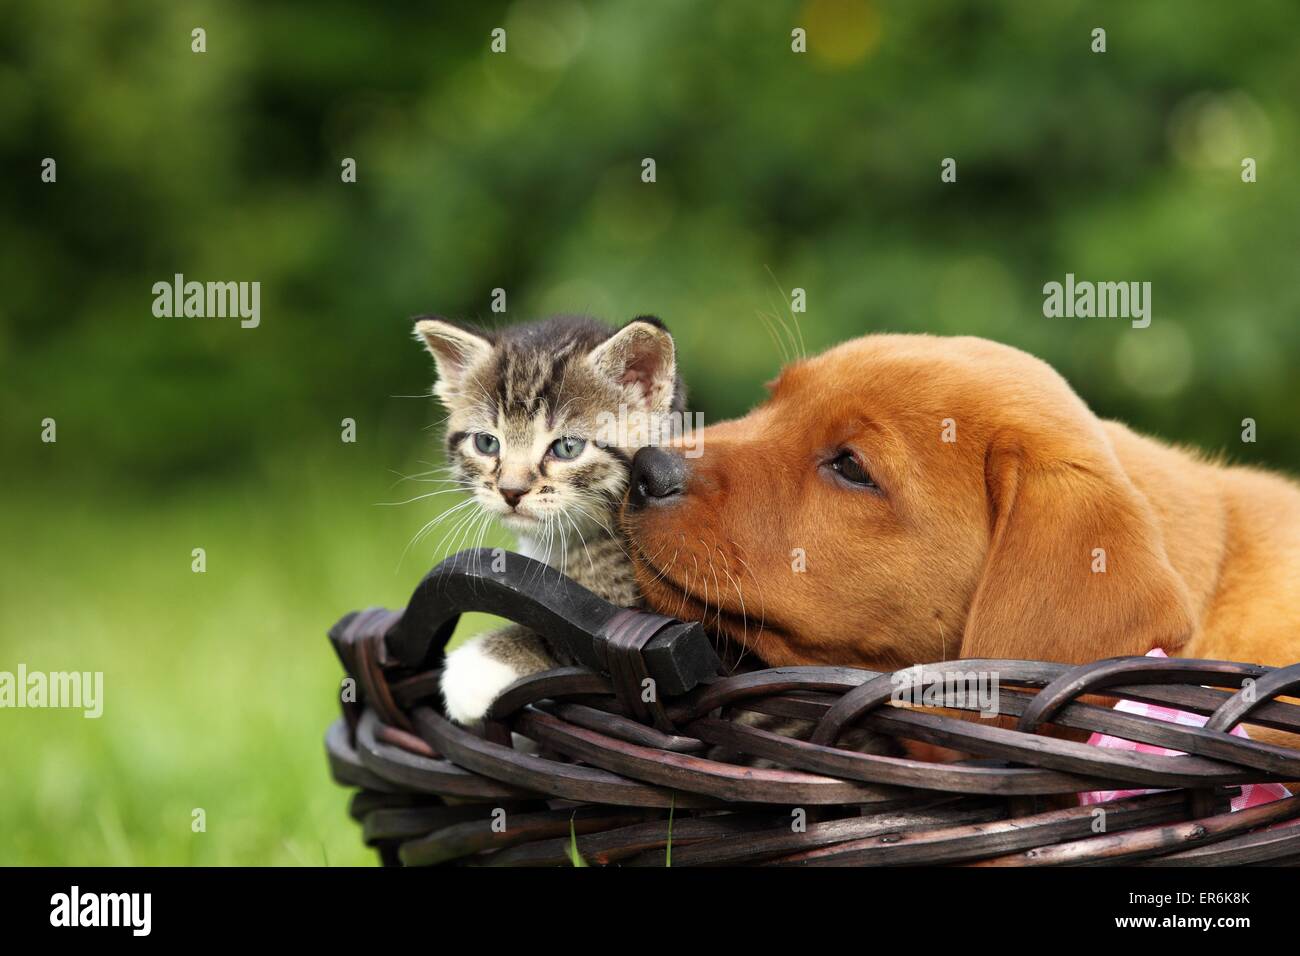 dog and cat Stock Photo